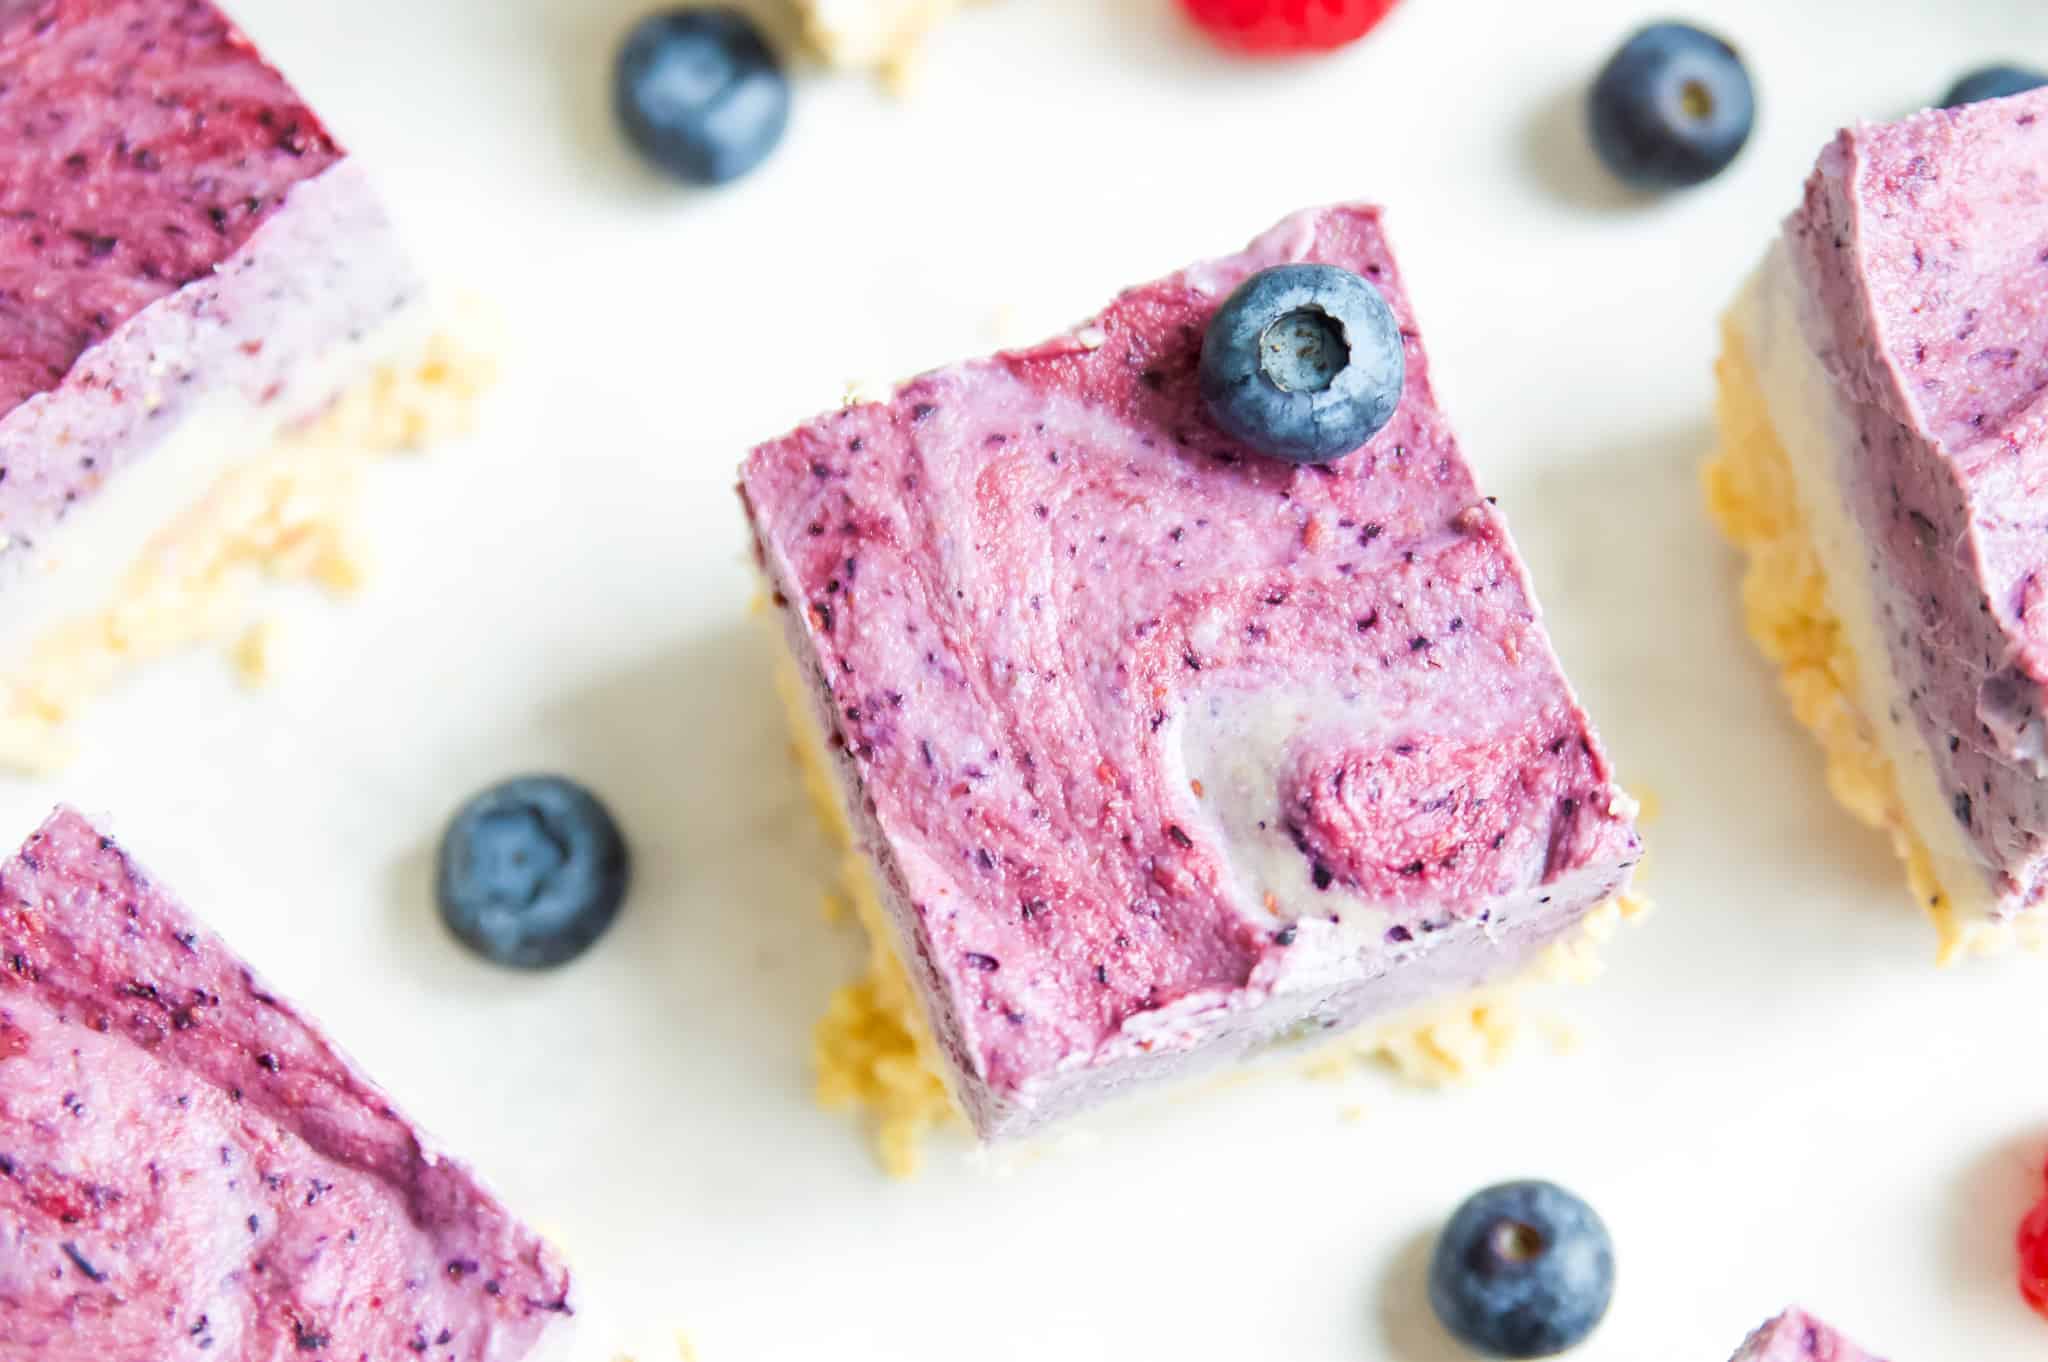 A batch of paleo ice cream bars topped with fresh blueberries.